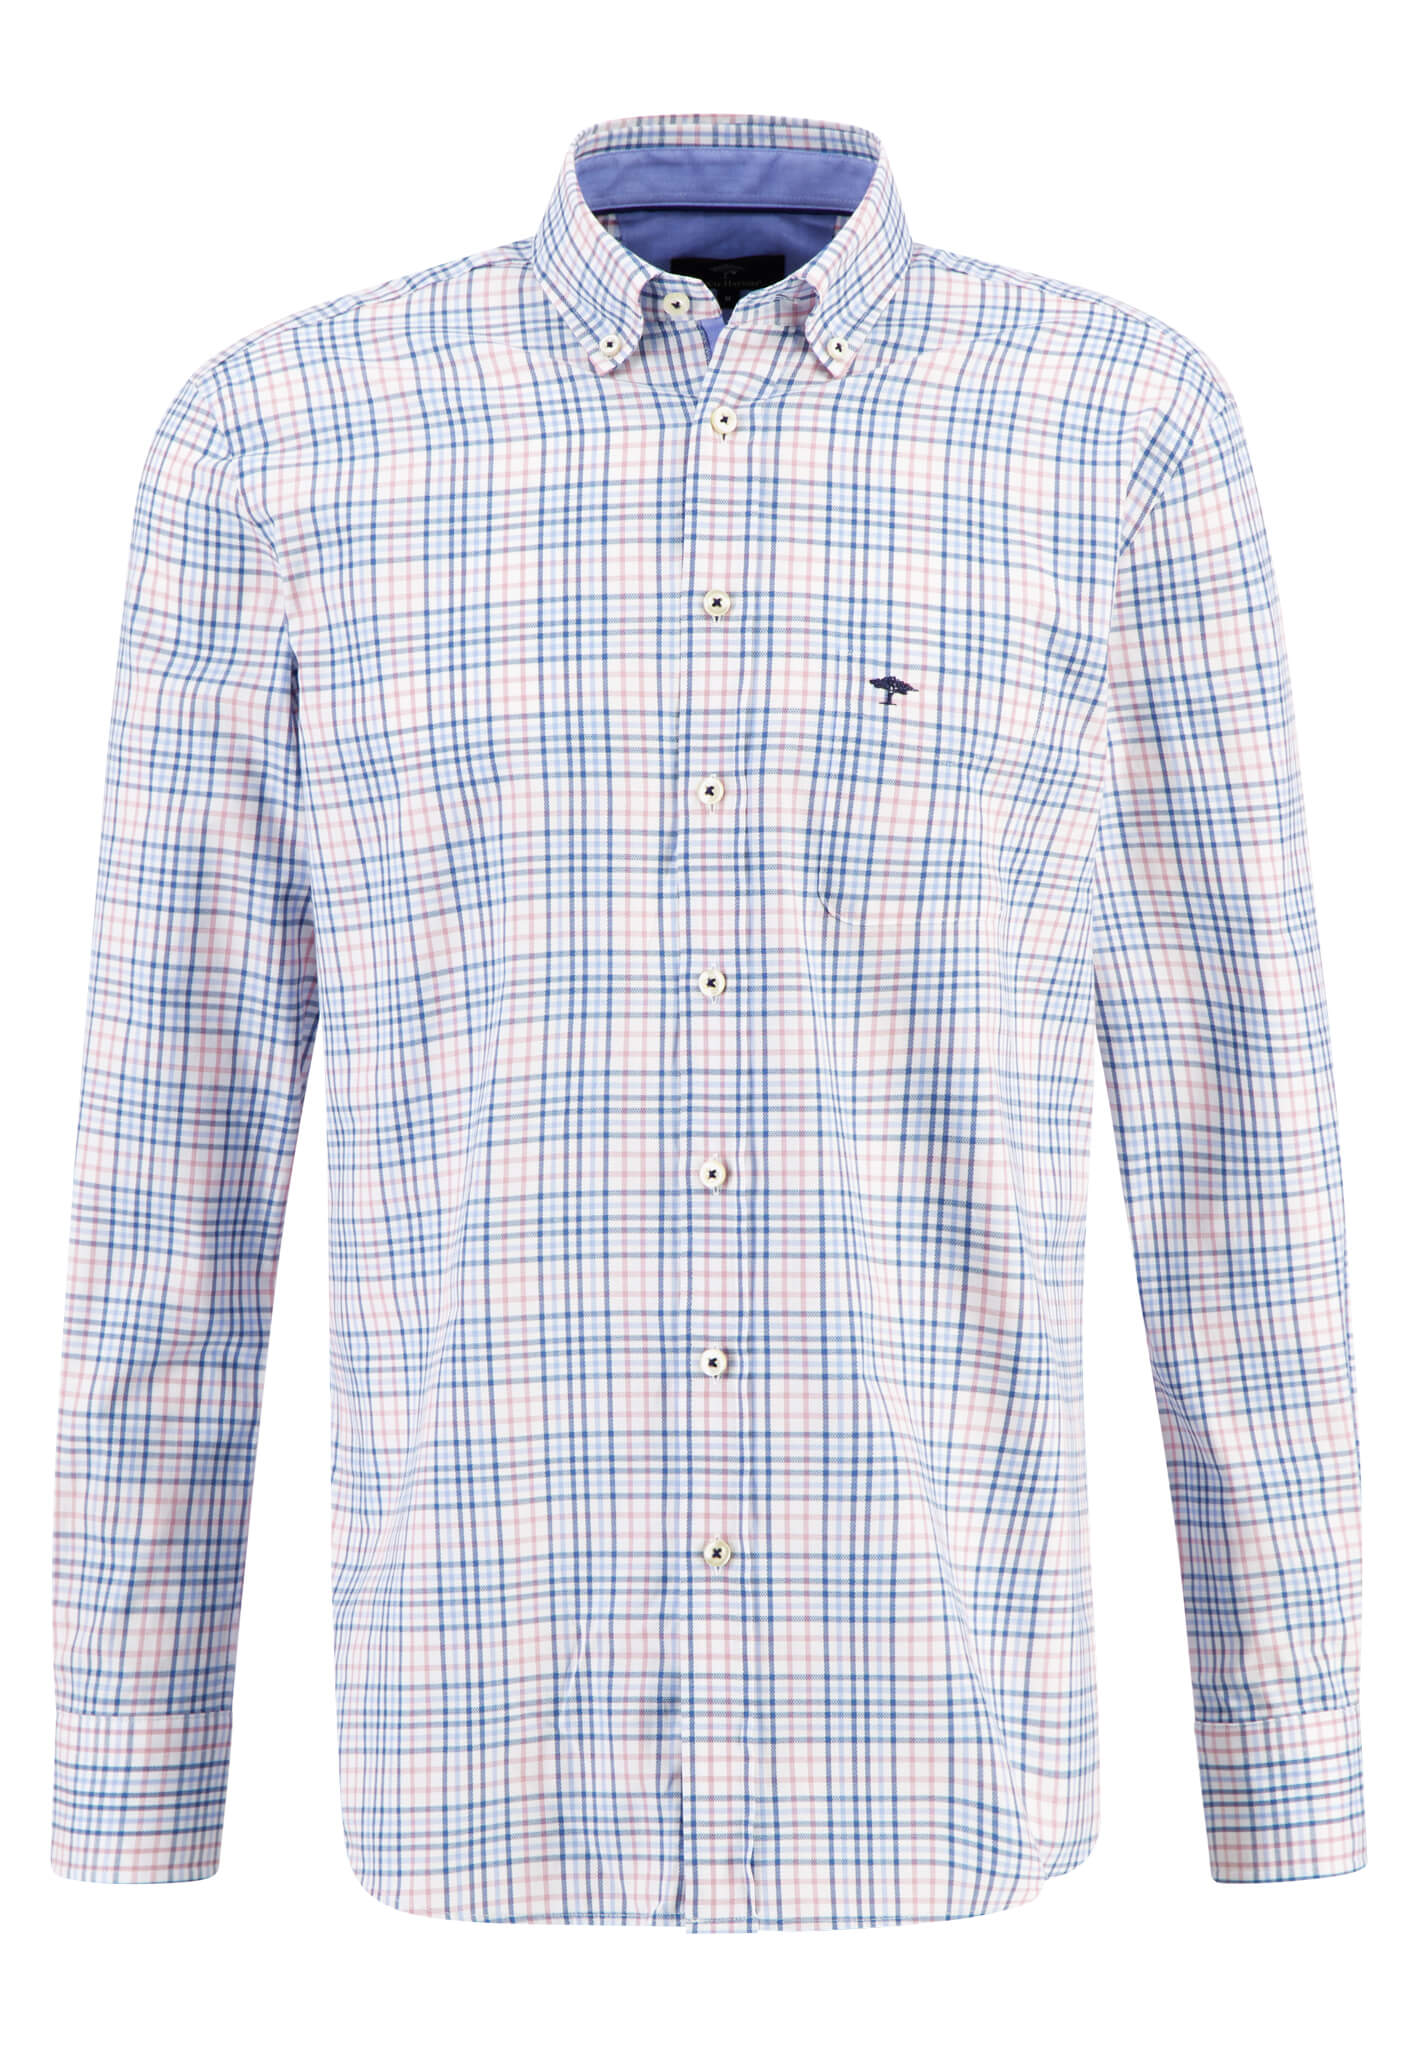 Fynch Hatton Structure Check Shirt front